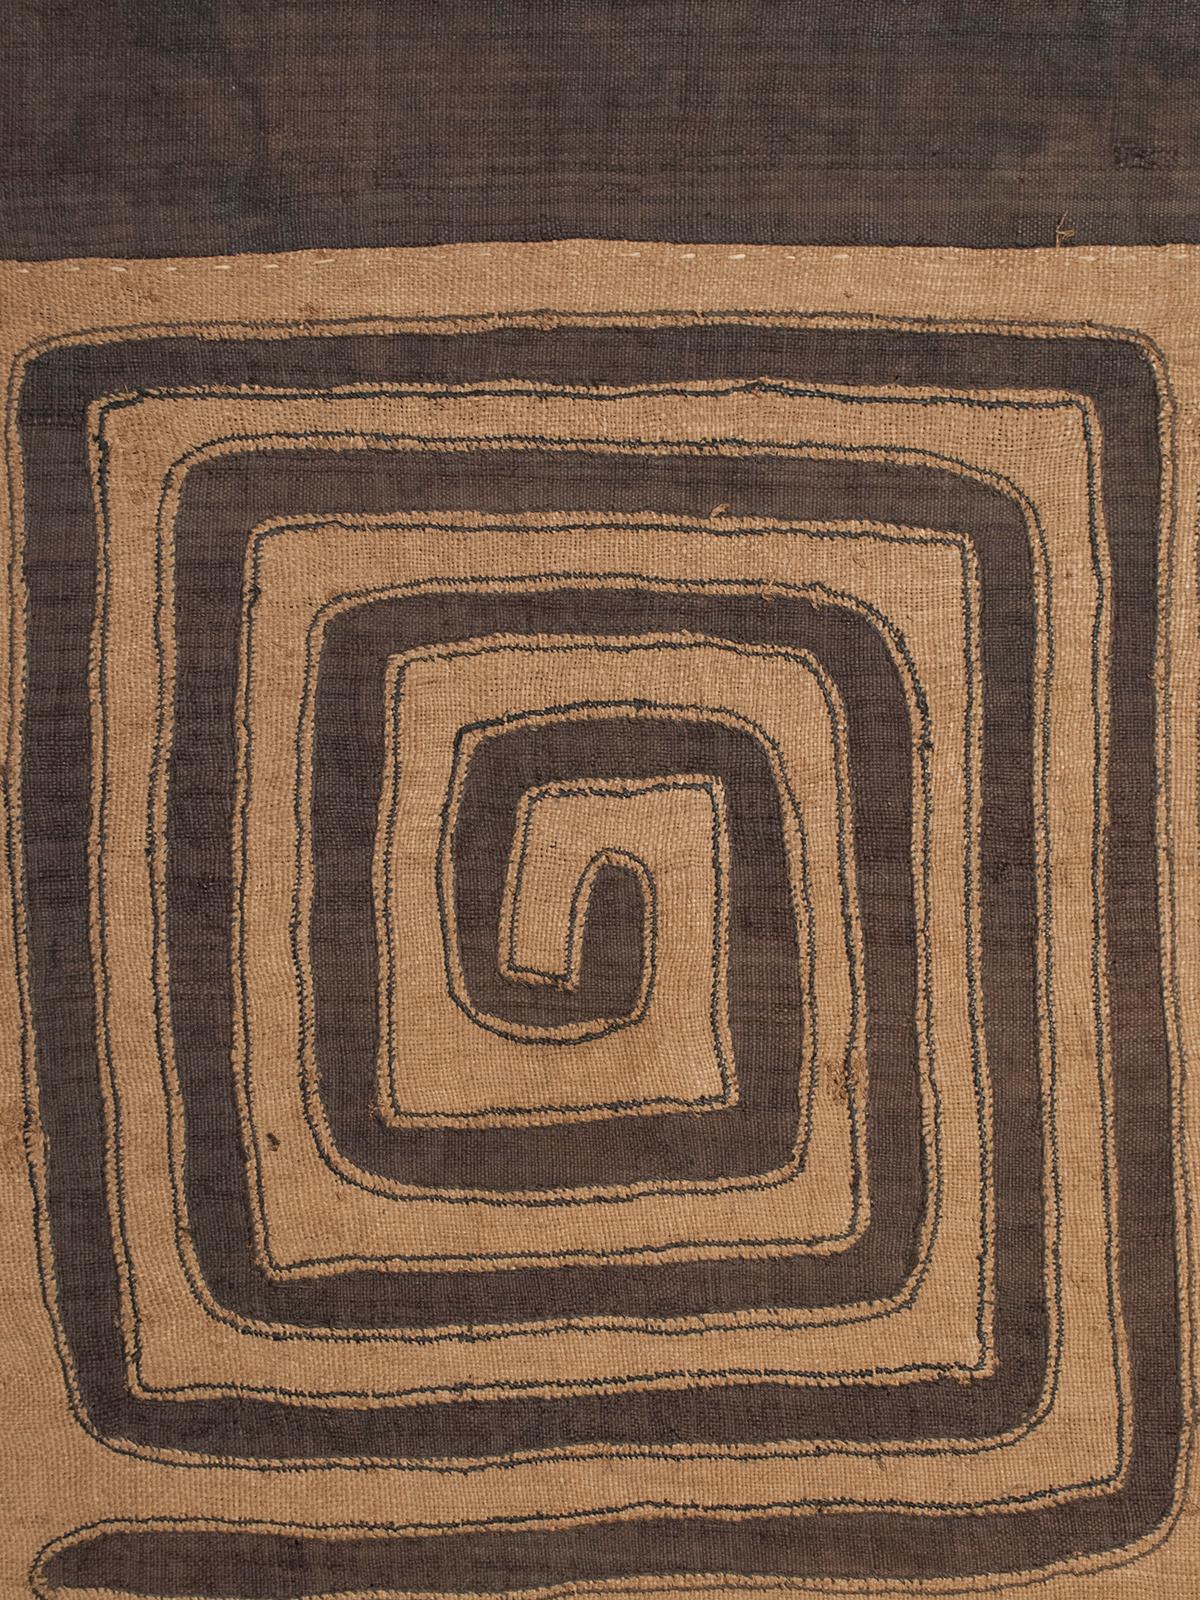 Mid-20th Century Dance Skirt Panel, Kuba, D.R.Congo

A wonderful, almost op-art Kuba dance skirt panel with an appliqued design of four squared spirals. The panel is professionally mounted on a wood frame.
 


 